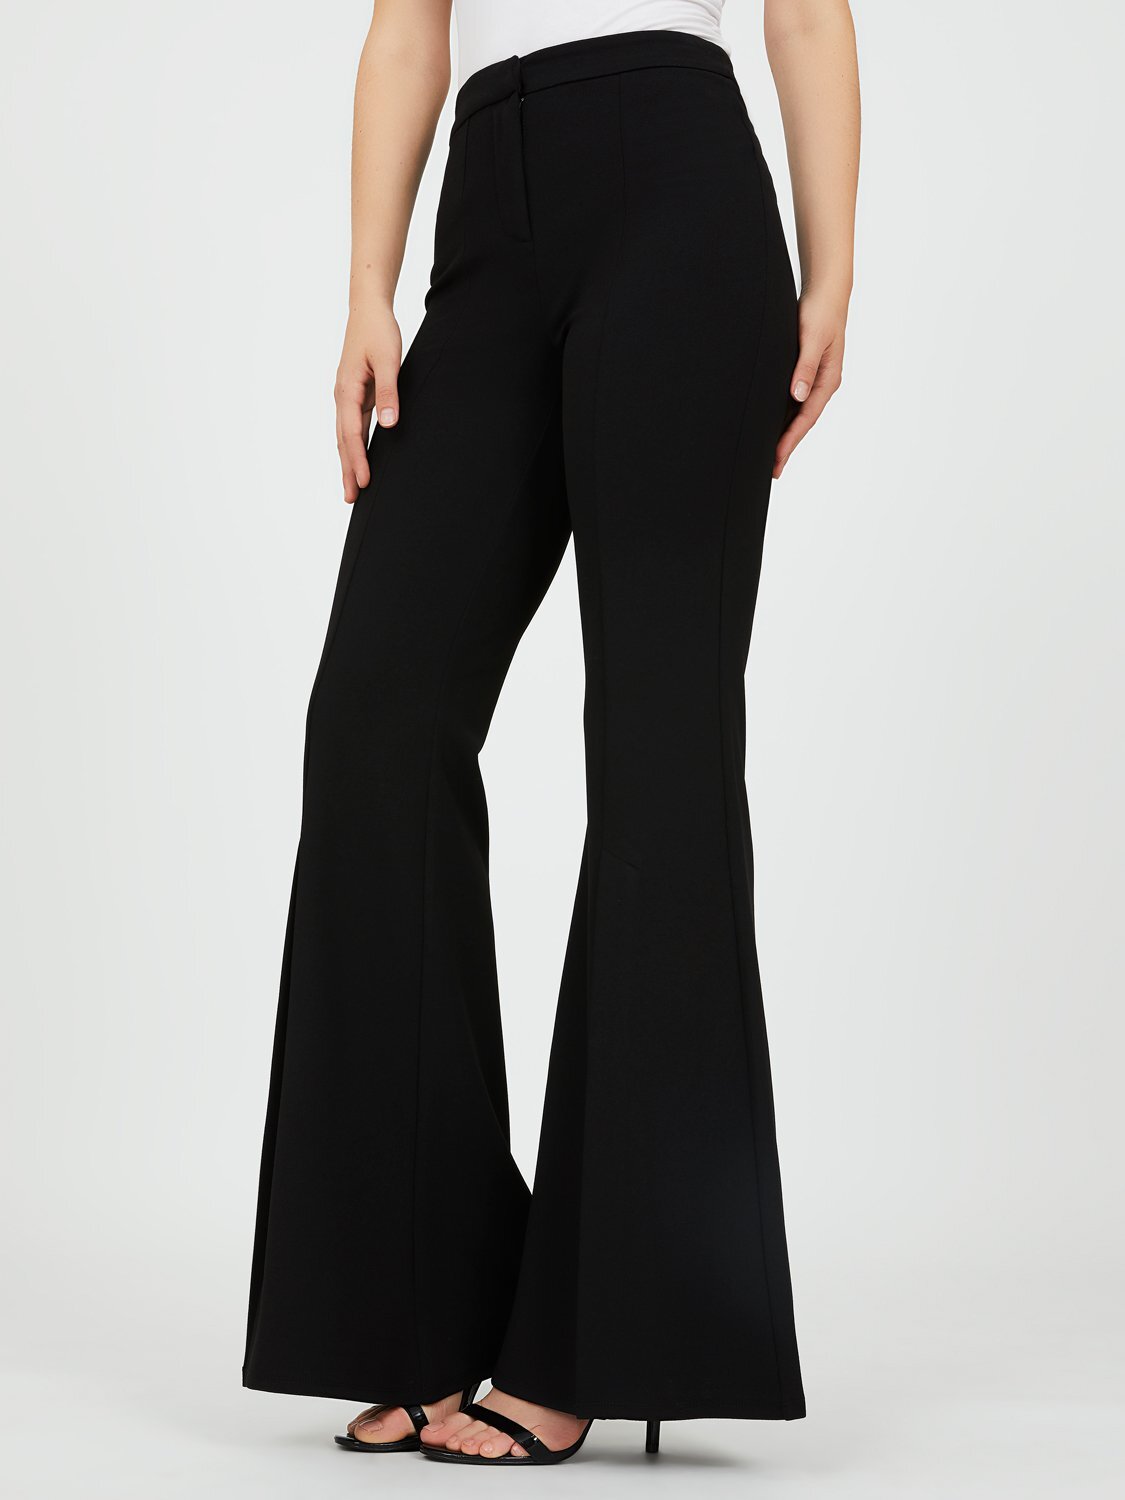 Fitted Crepe Flare Pants .jpg